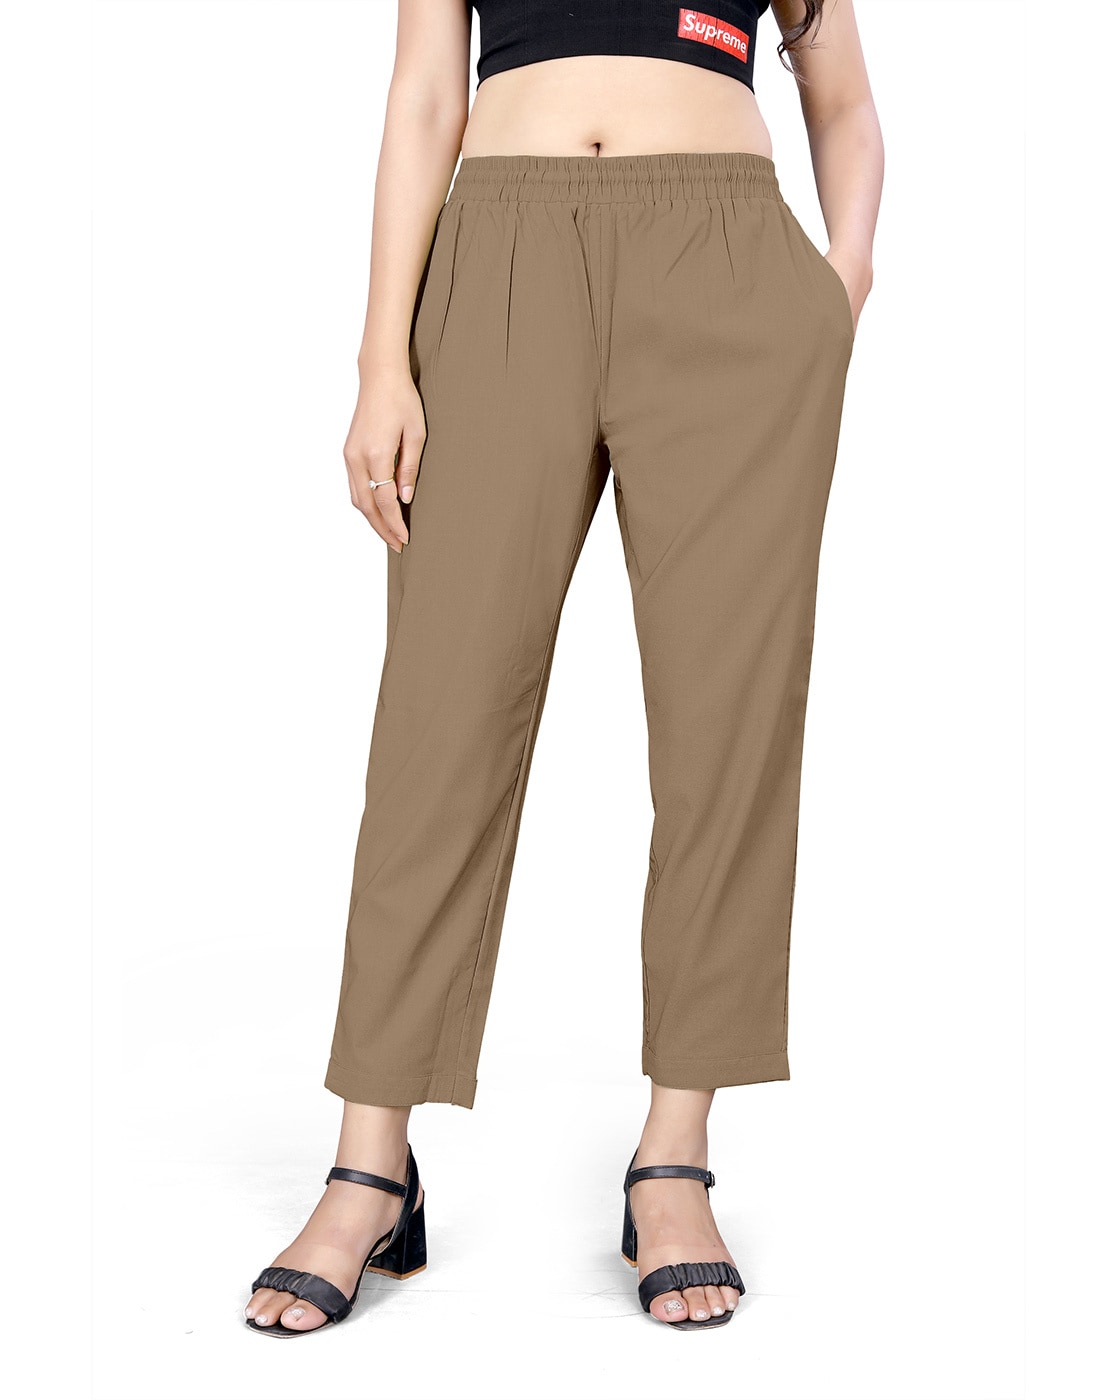 Flat Front Pants with Insert Pockets